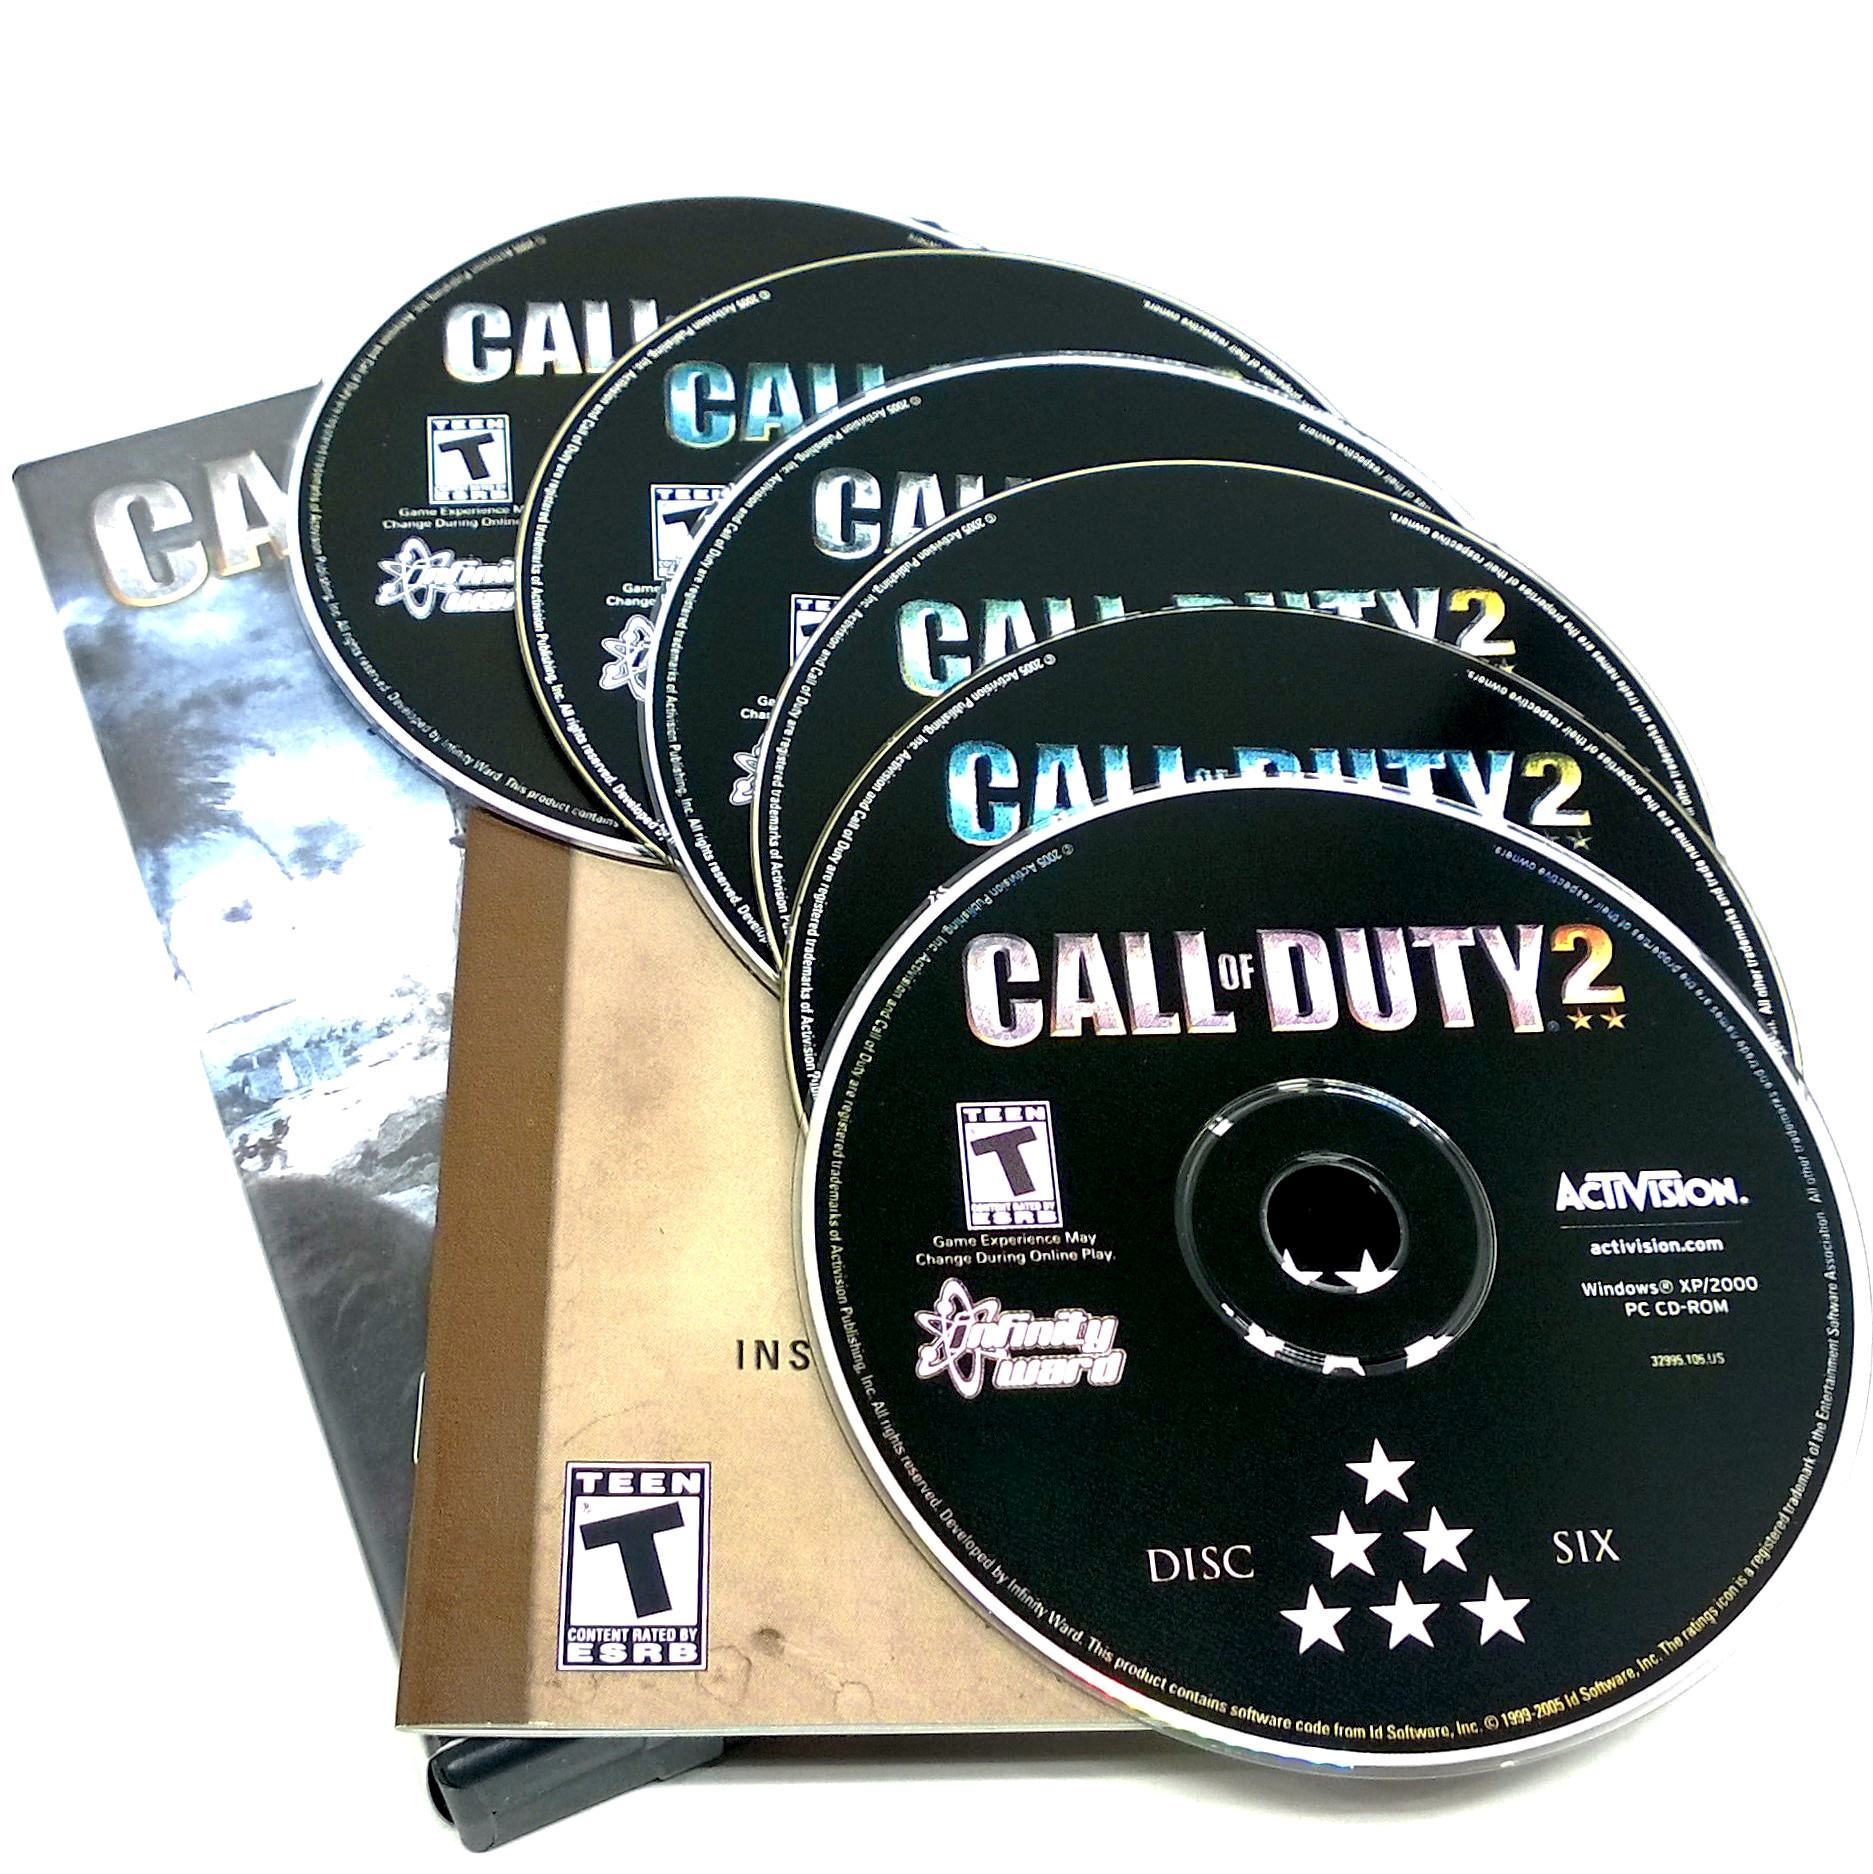 Super Adventures in Gaming: Call of Duty 2 (PC)